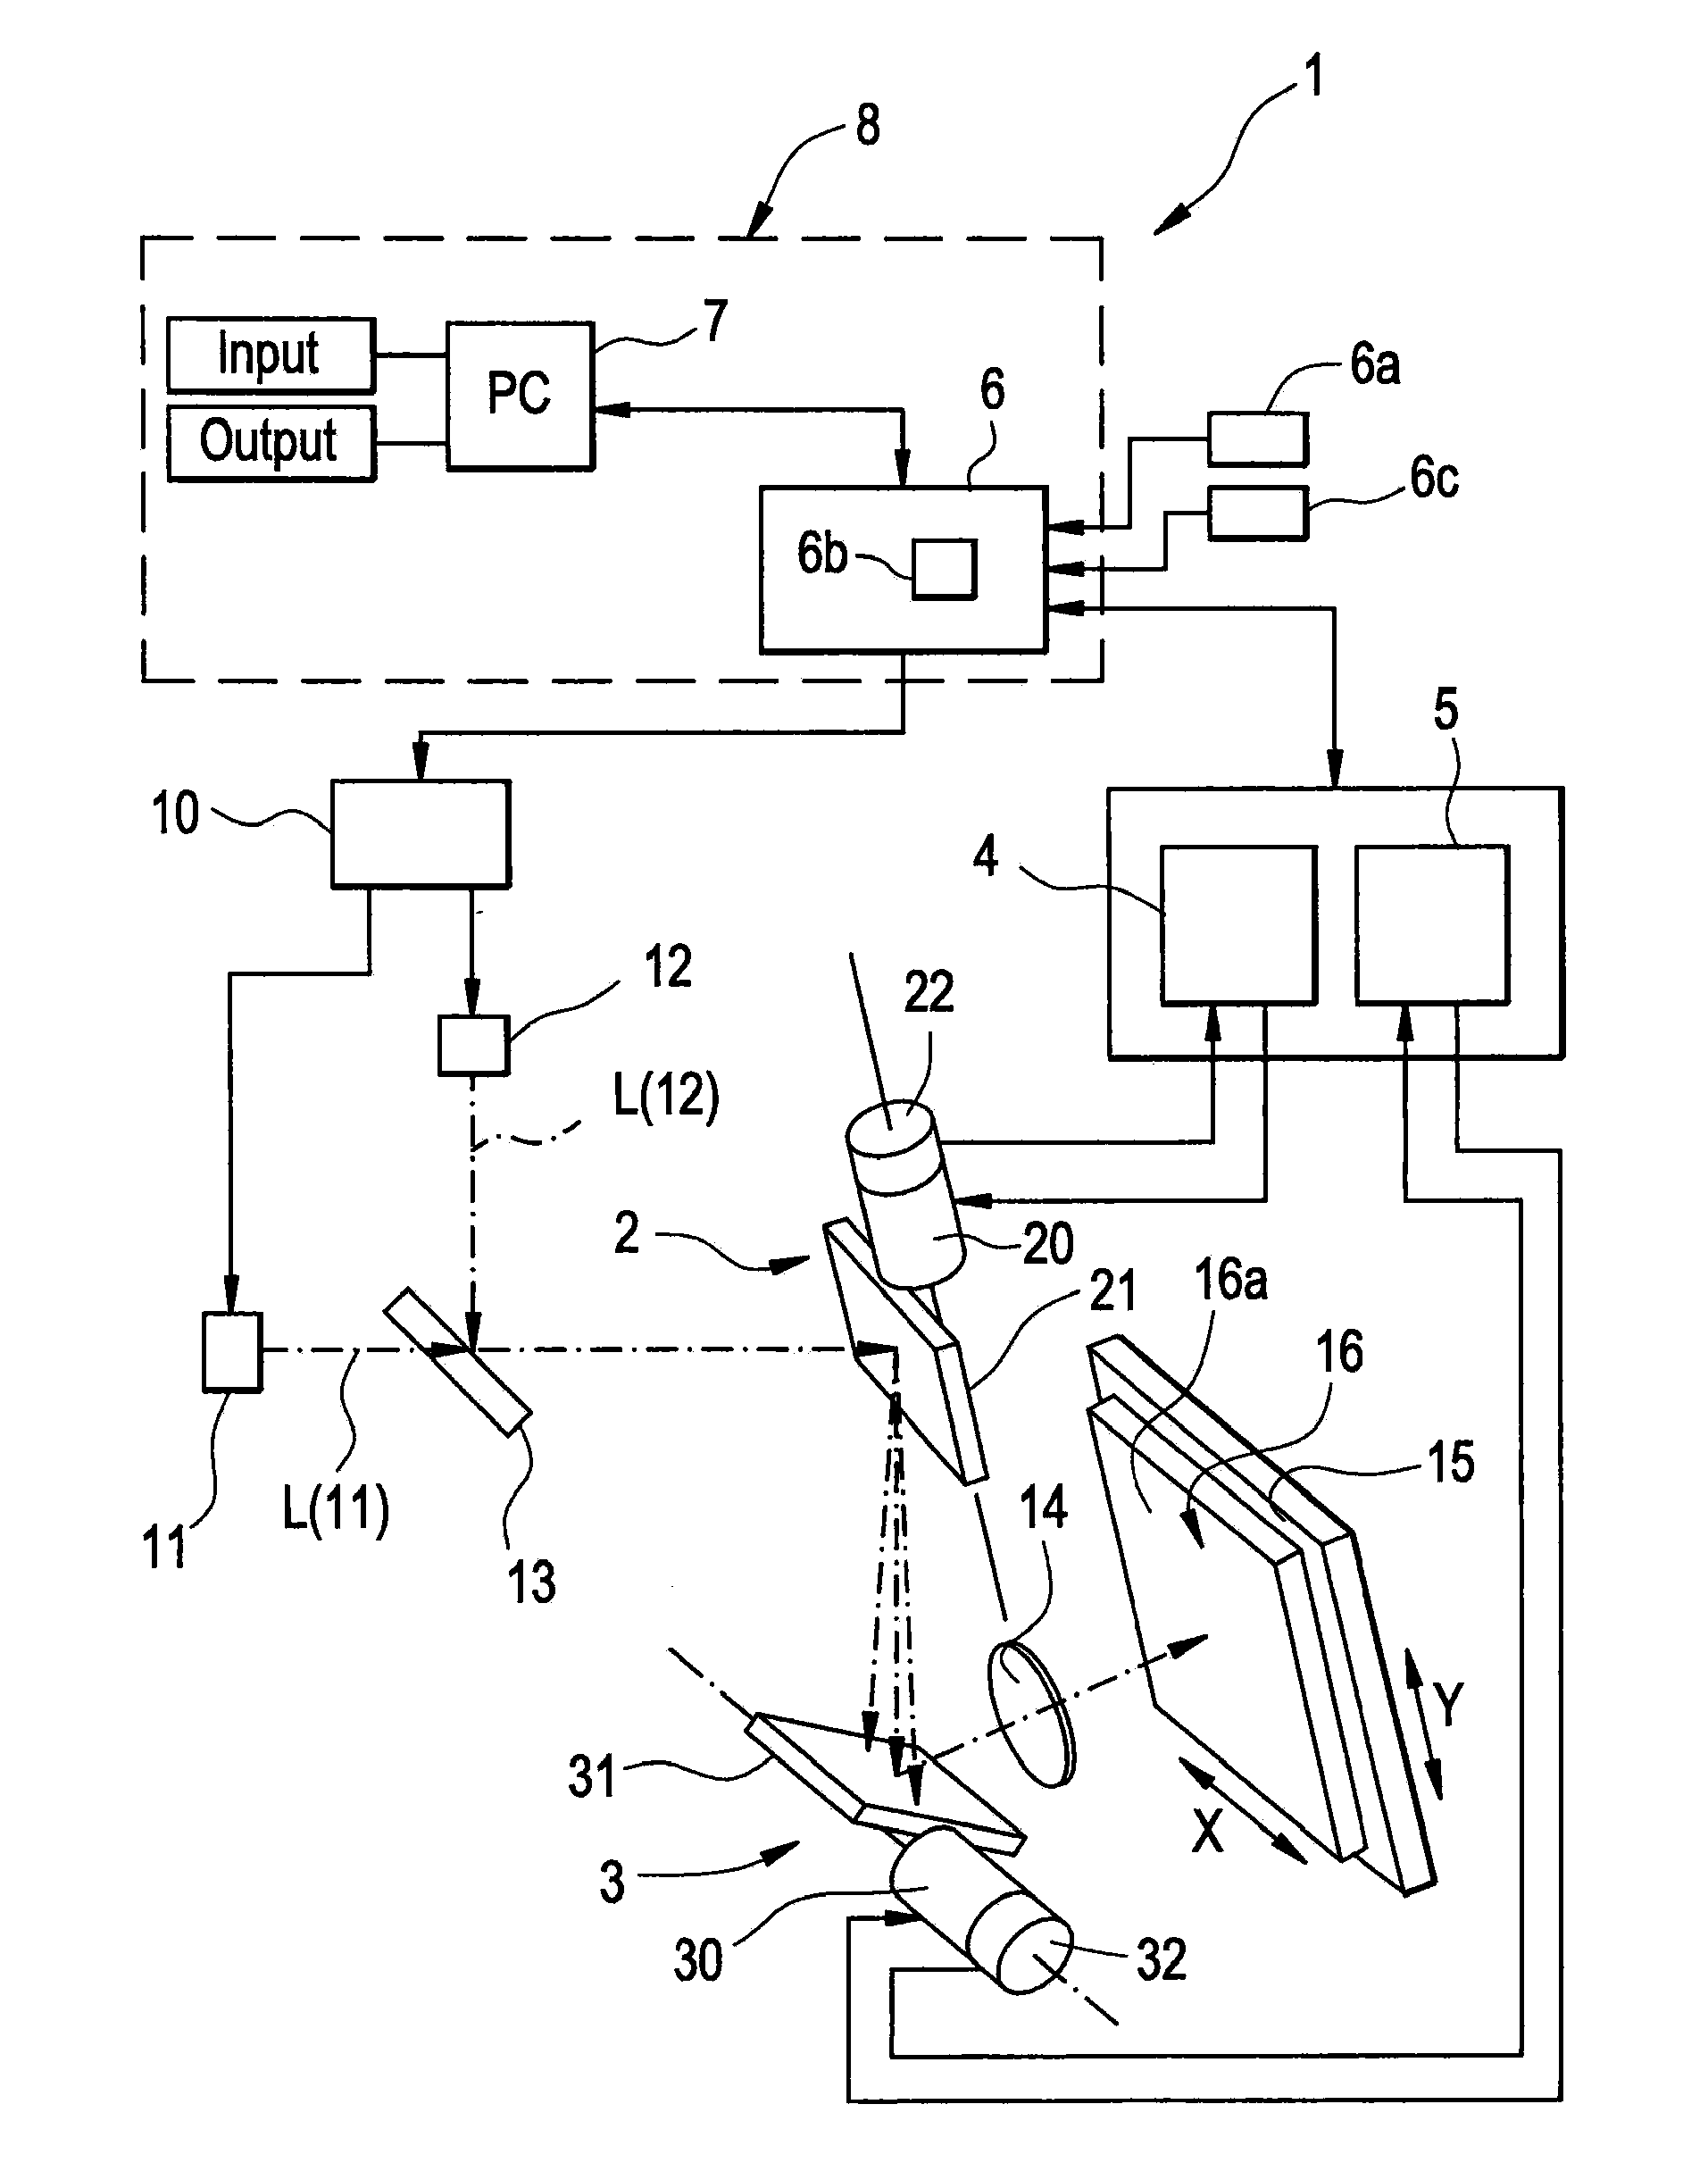 Method for creating drive pattern for galvano-scanner system